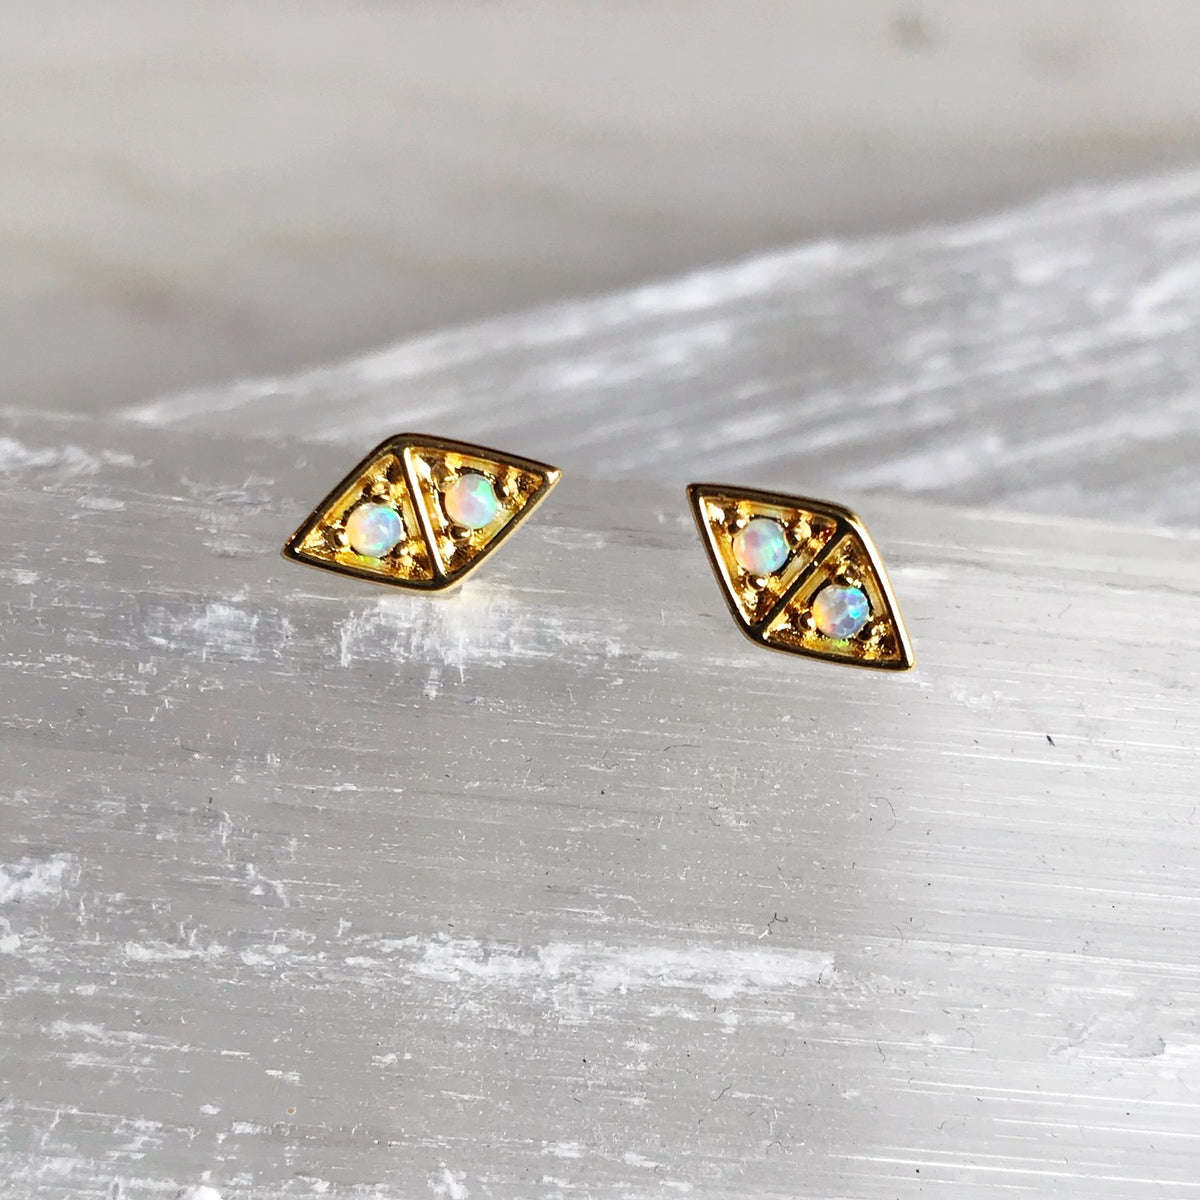 Double Triangle Studs